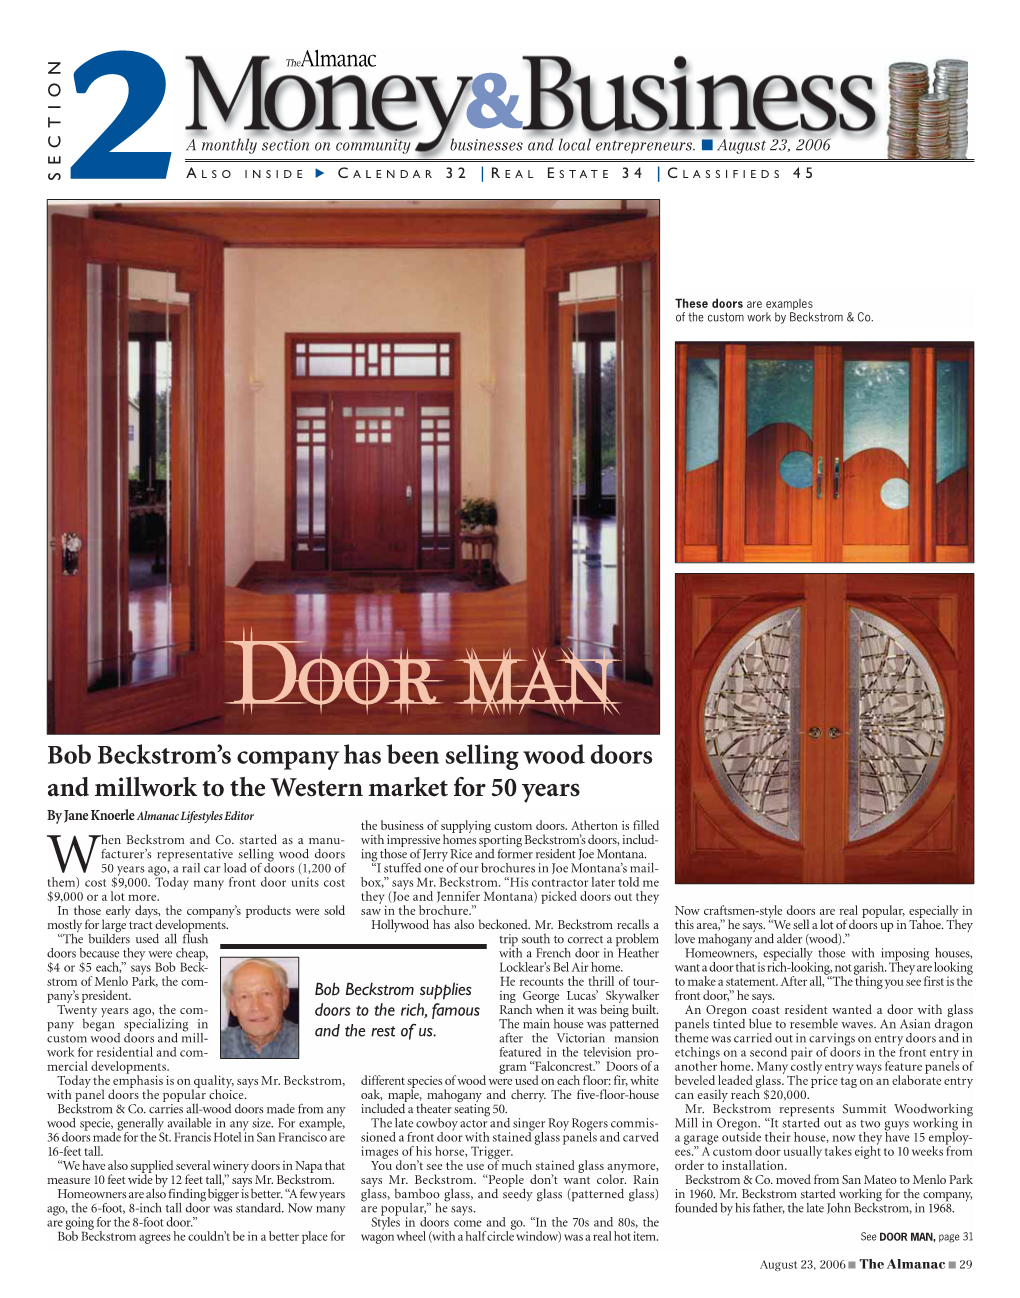 Bob Beckstrom's Company Has Been Selling Wood Doors and Millwork To